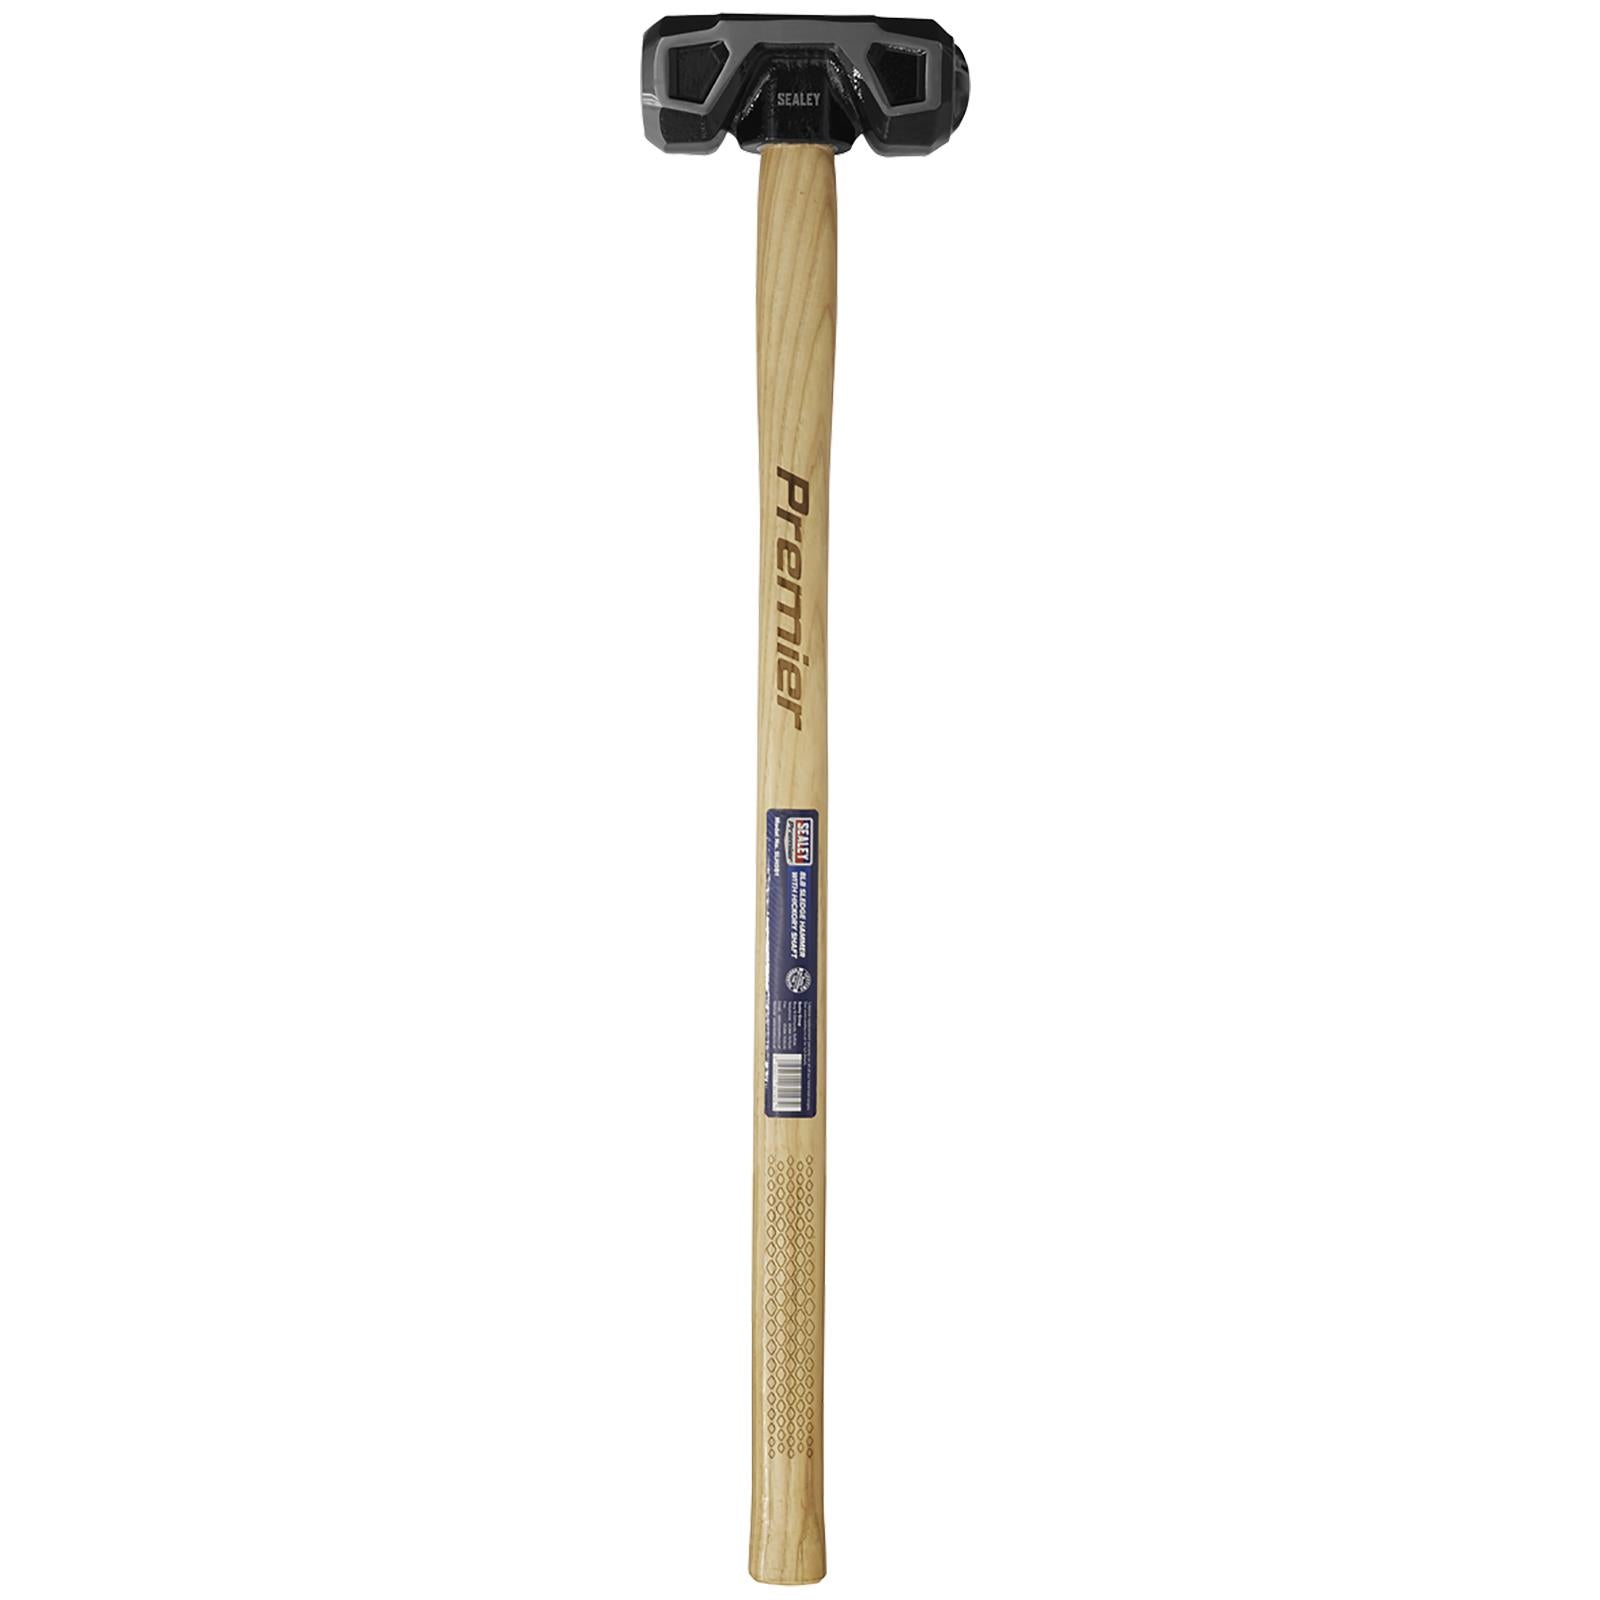 Sealey Sledge Hammer 8lb with Hickory Shaft Premier